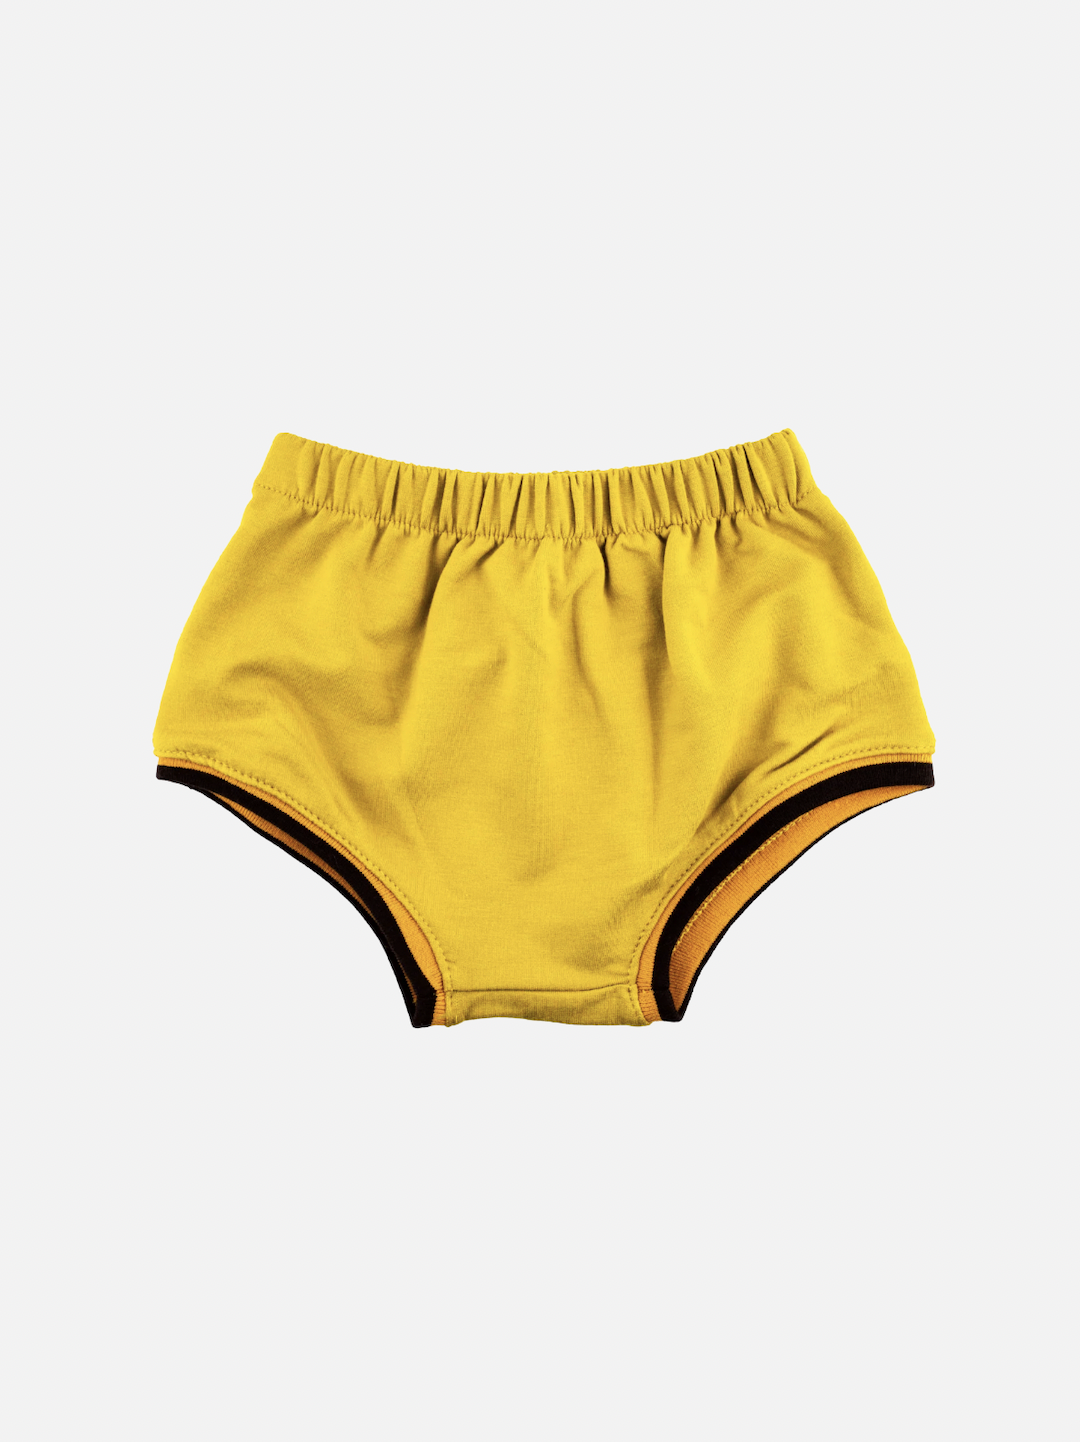 Sunshine yellow kids' bloomers with black trim on leg holes, front view